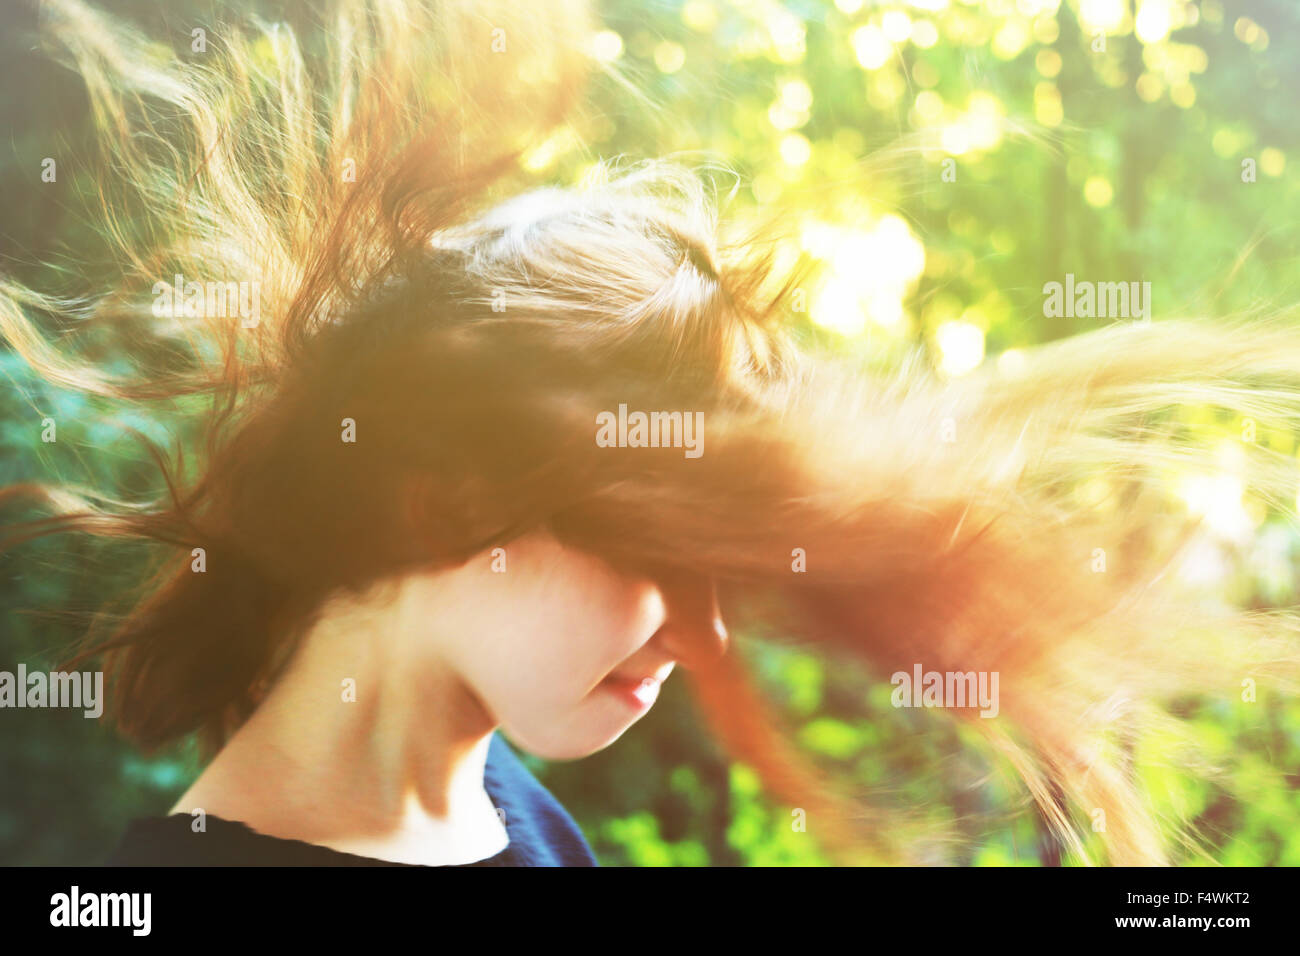 Young girl with long hair standing on strong wind. Soft focus. Stock Photo